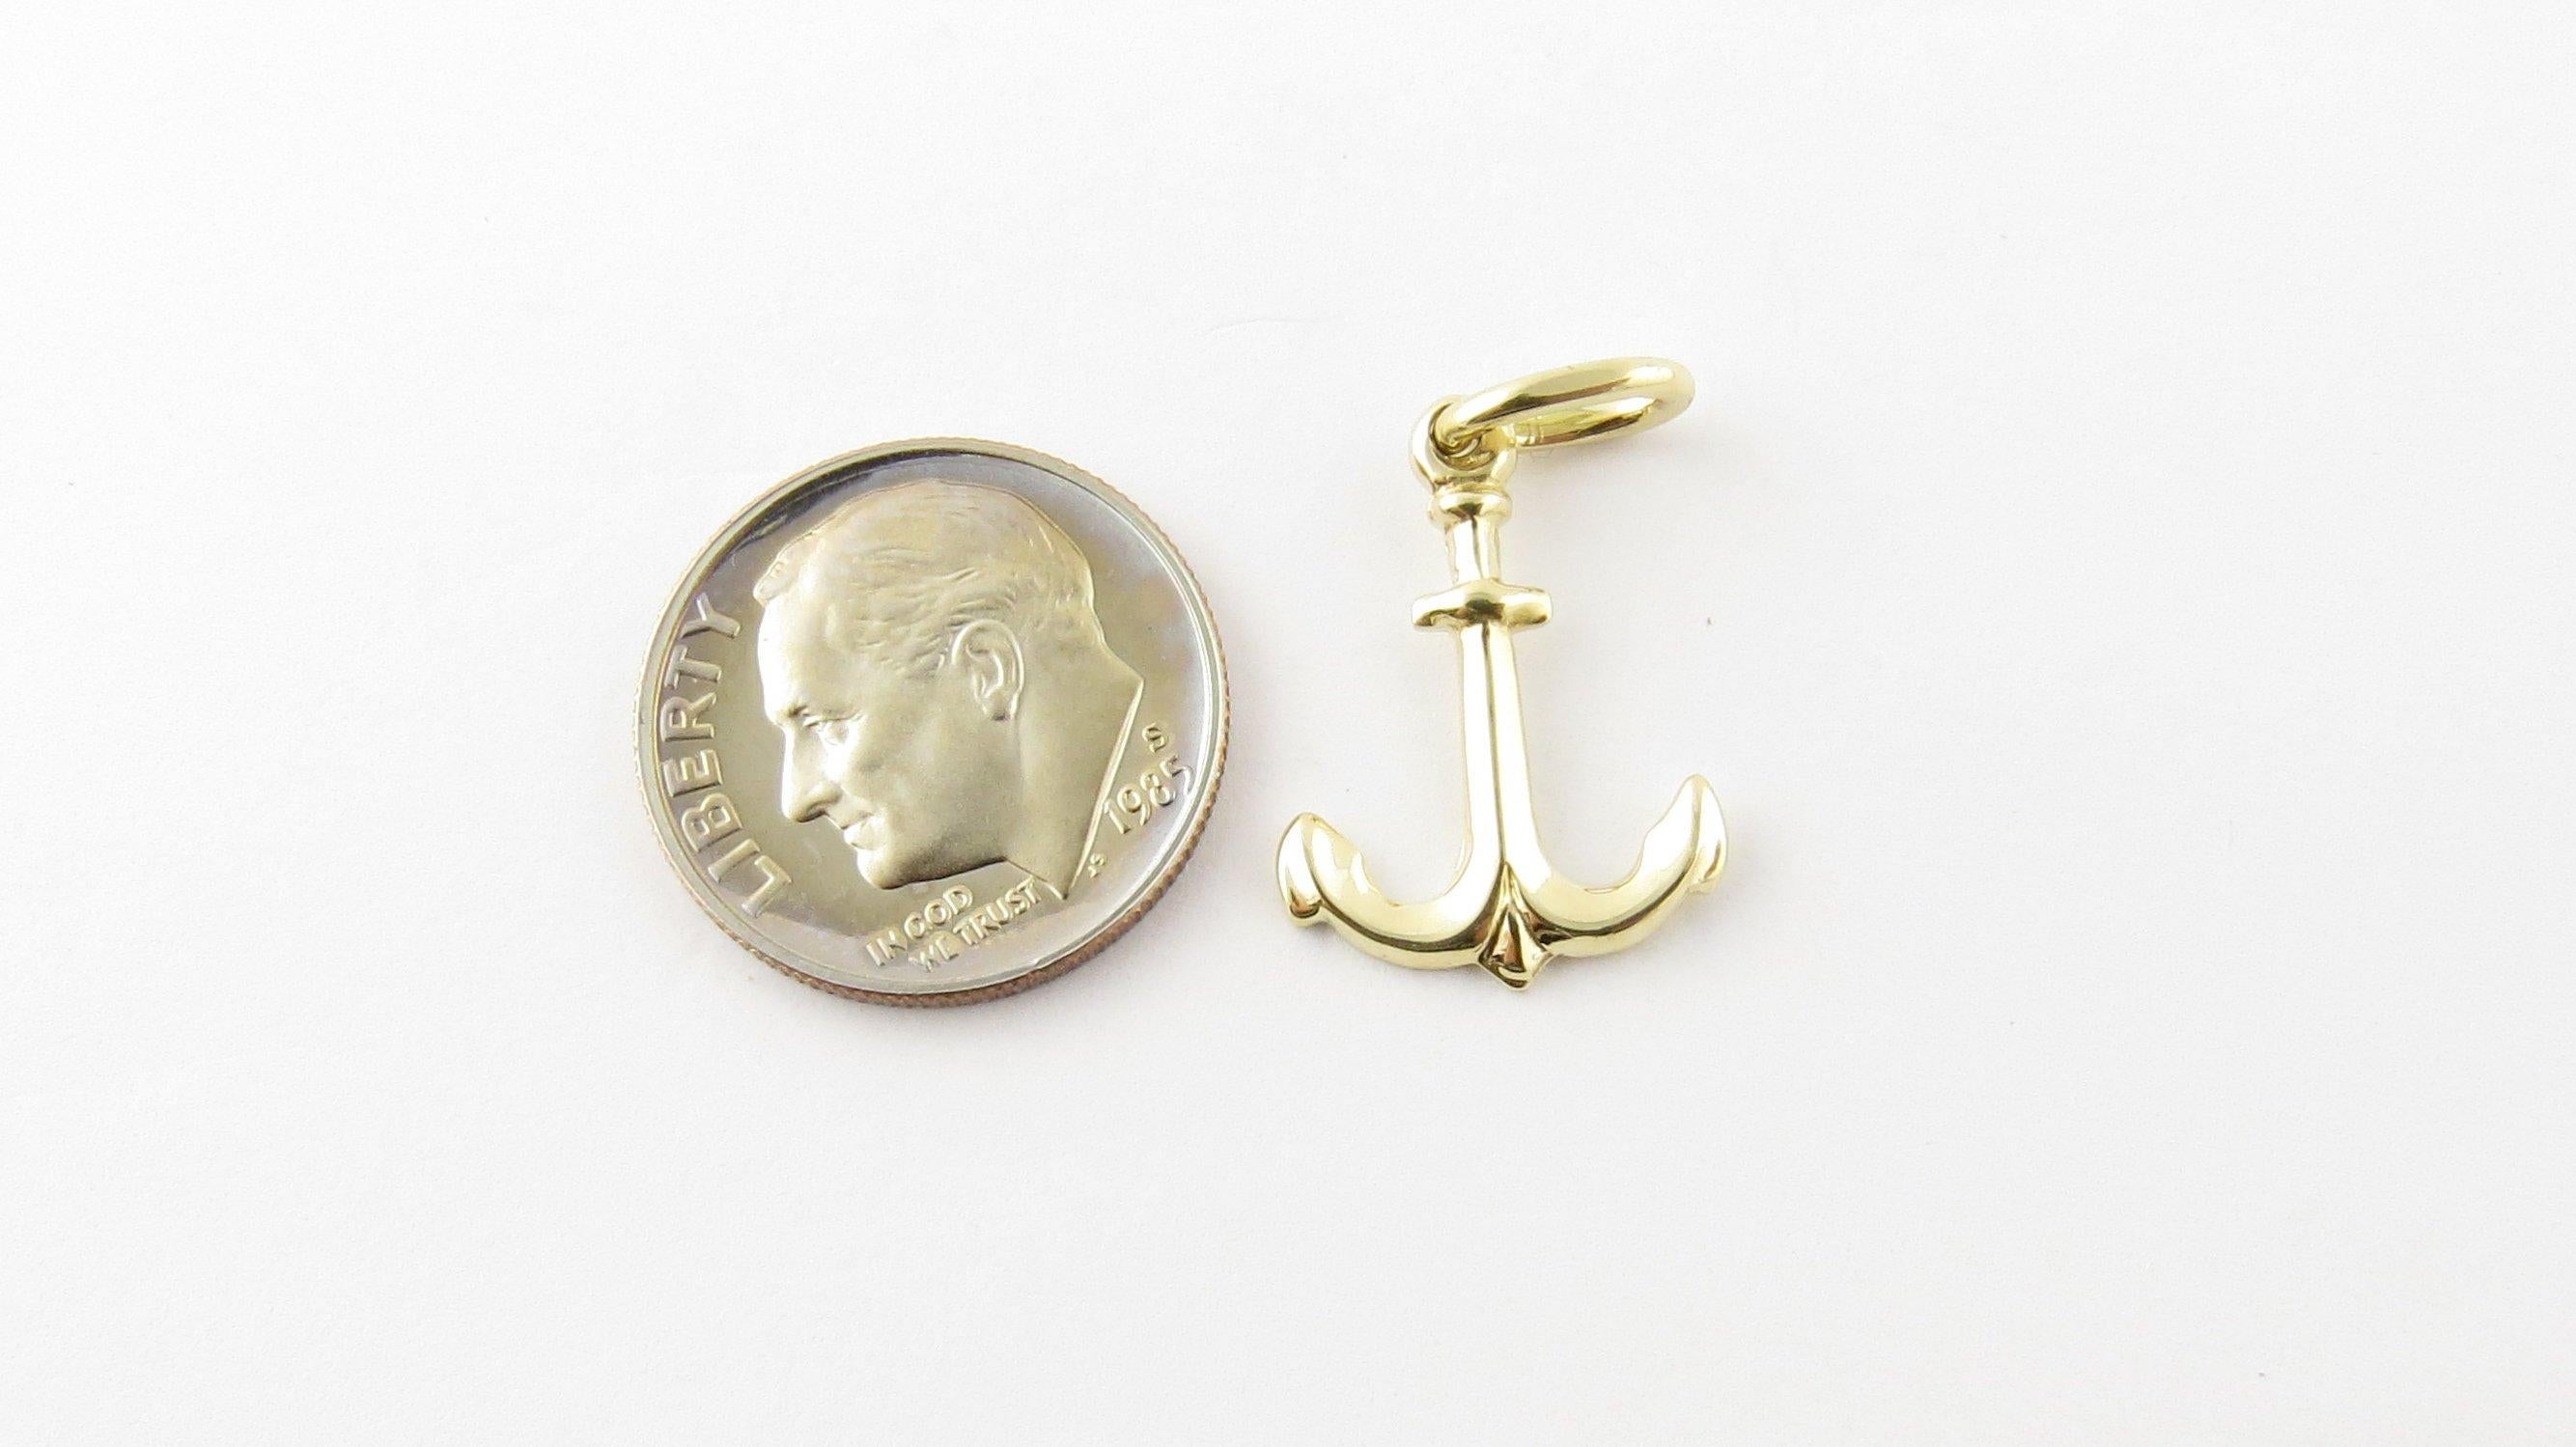 Vintage 14 Karat Yellow Gold Anchor Charm. Anchors Aweigh! This nautical charm features a miniature anchor meticulously detailed in 14K yellow gold.
Size: 18 mm x 14 mm (actual charm) Weight: 0.5 dwt. / 0.9 gr. Stamped: 14K Italy Very good